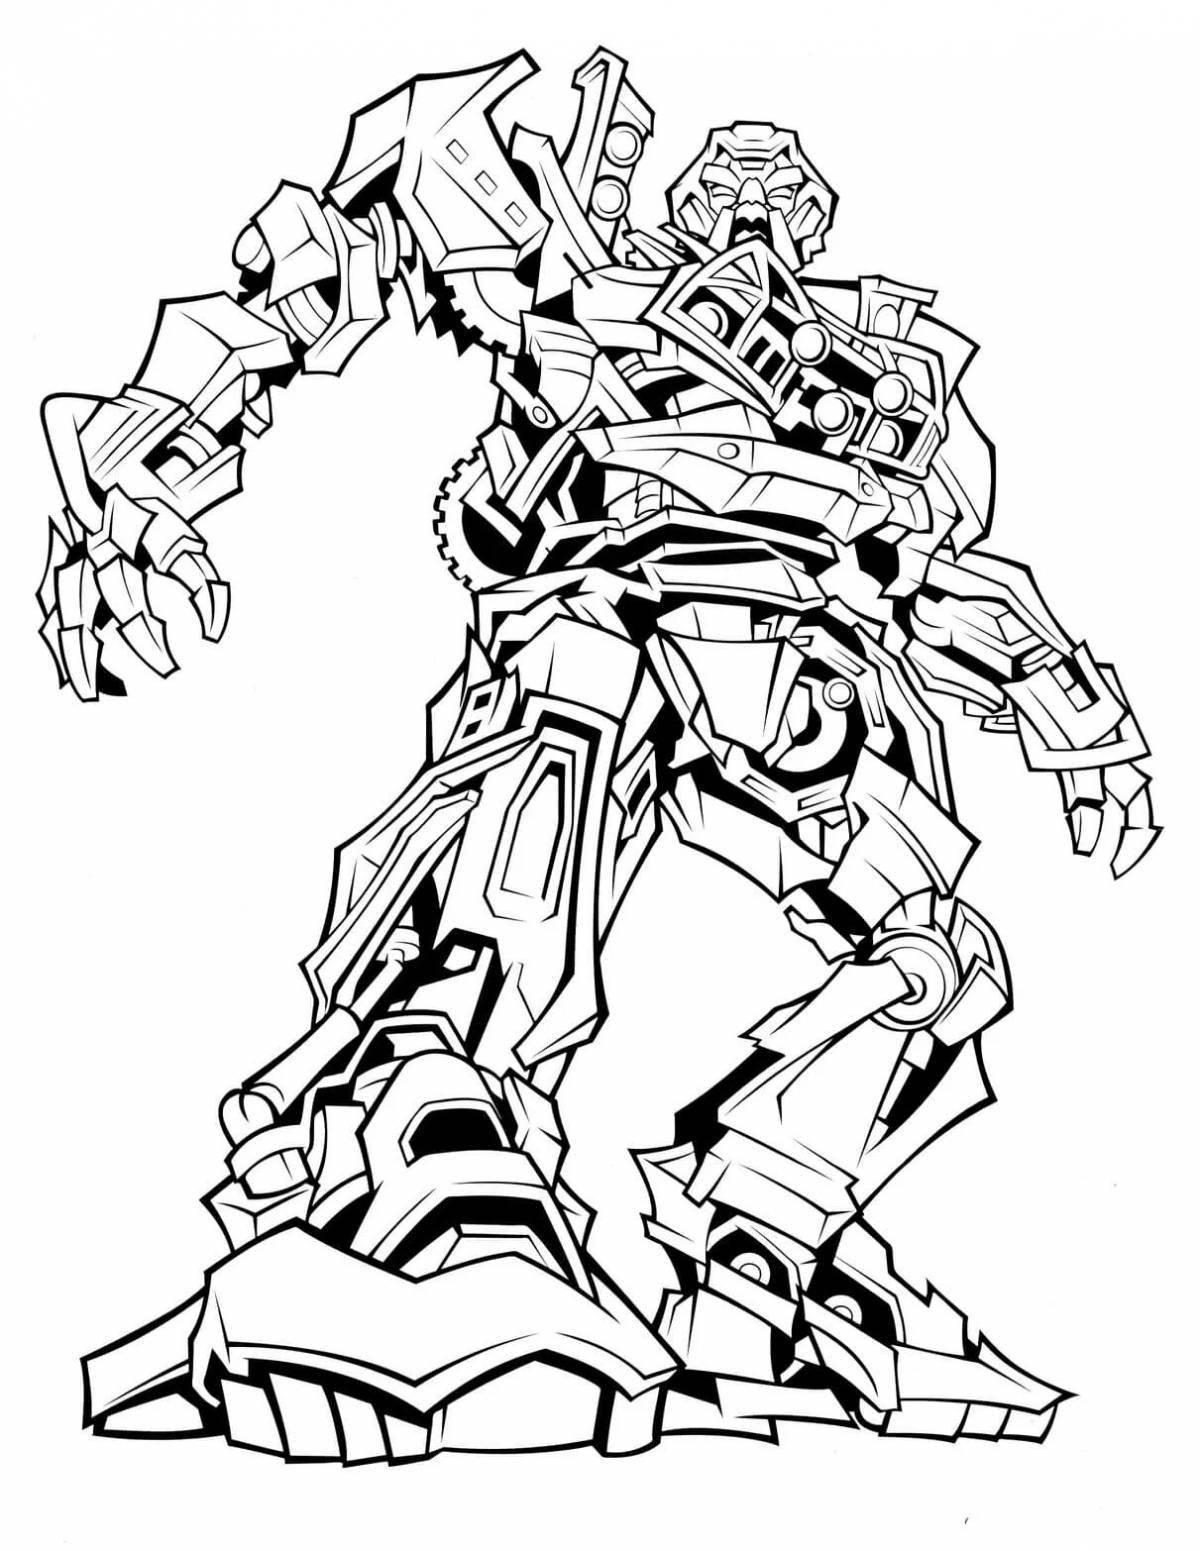 Amazing Transformers coloring page